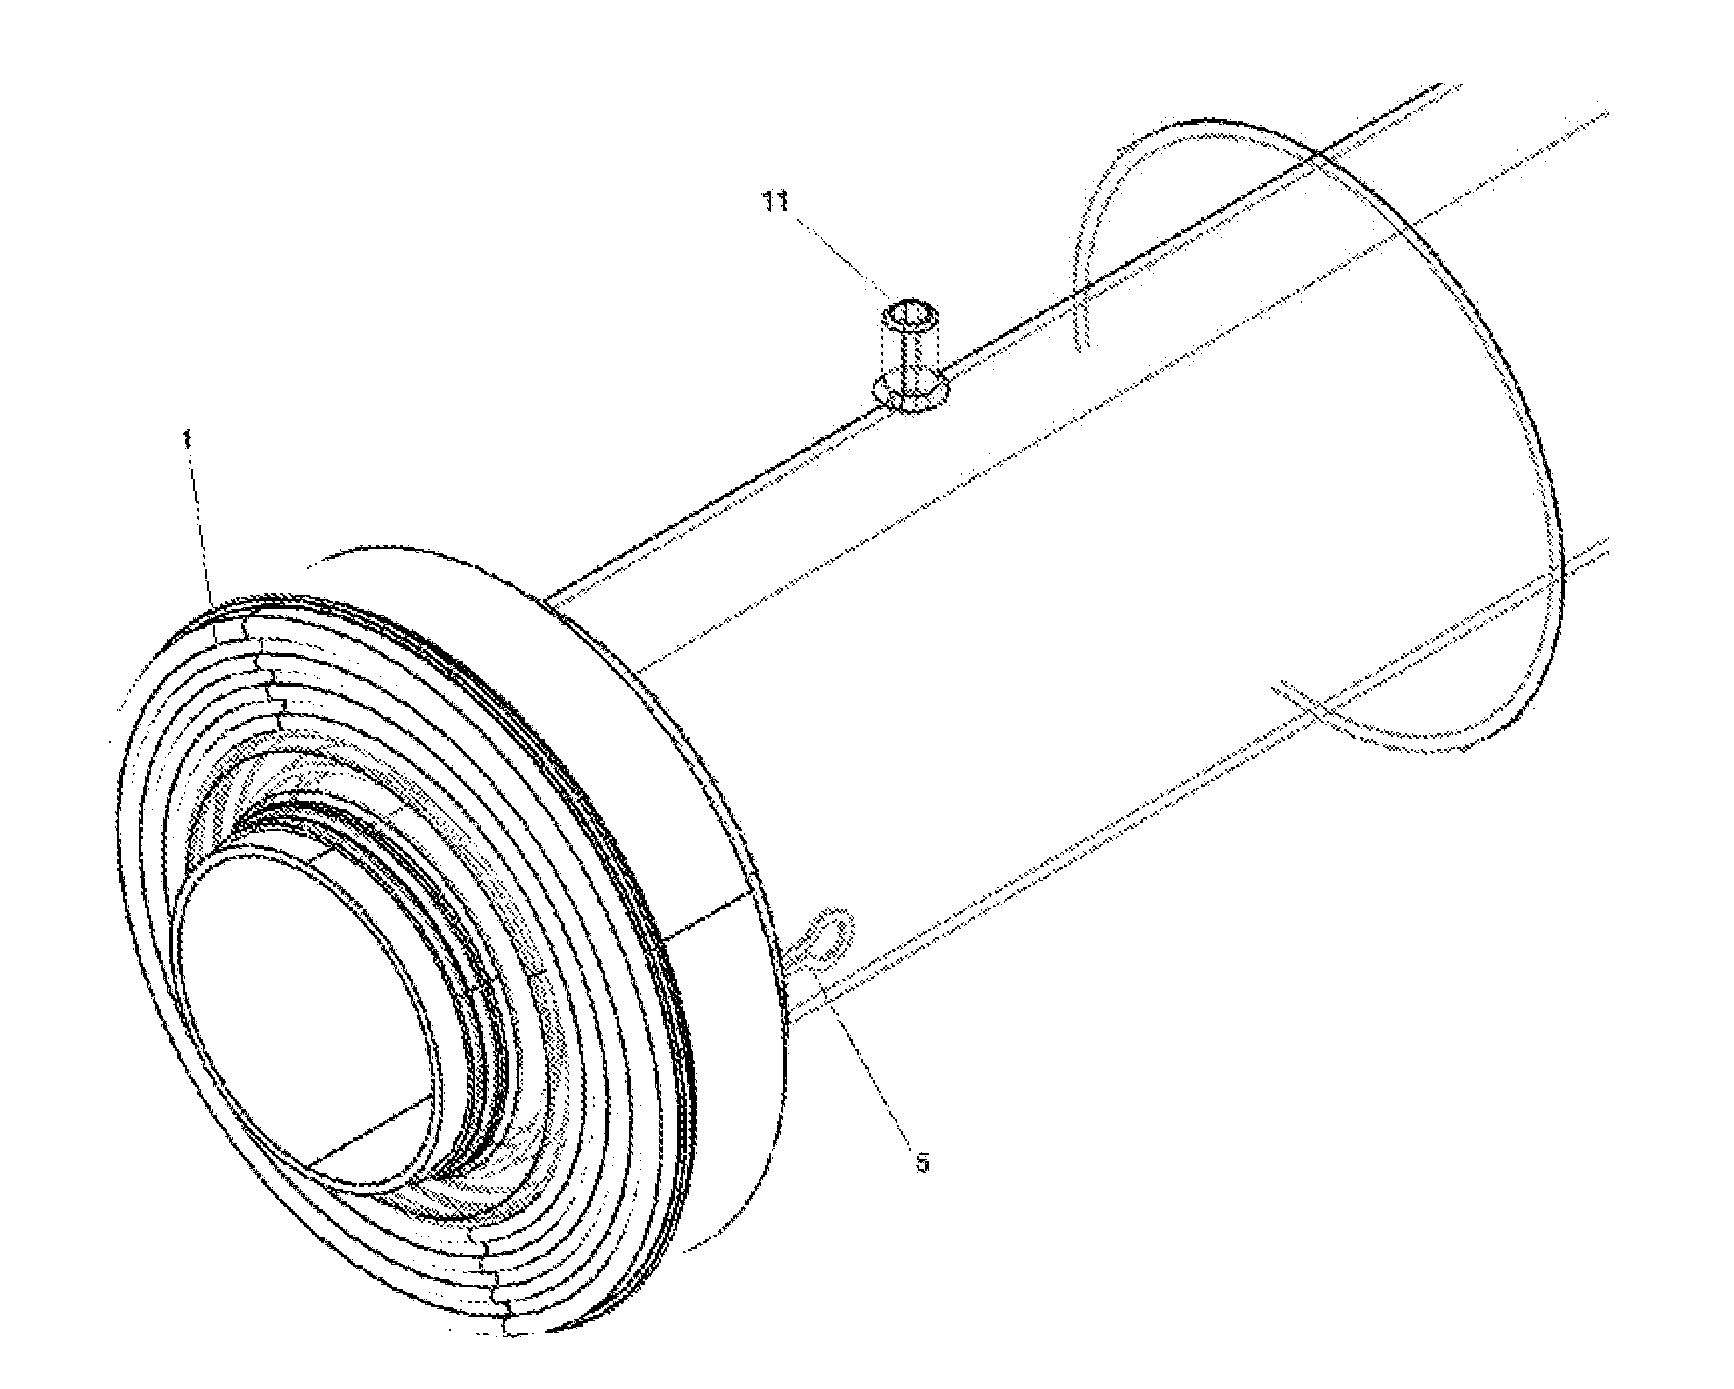 Method for producing a solar power receiving tube and resulting tube